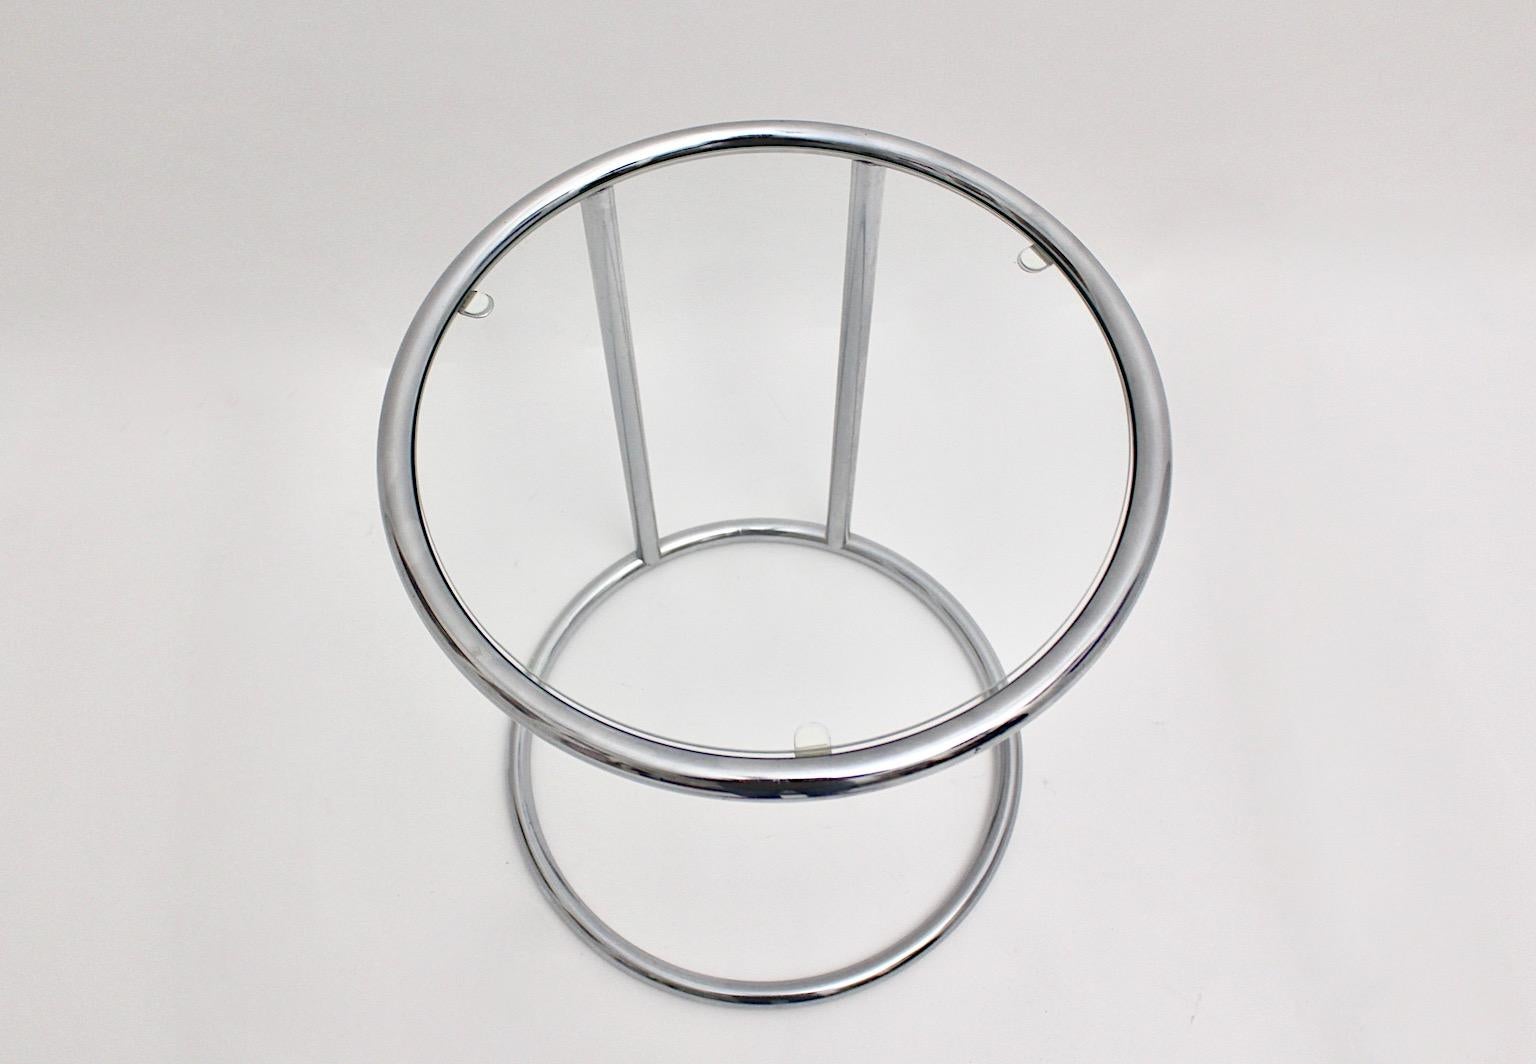 Modernist chromed metal with clear glass plate in circular shape Italy 1980s.
The side table shows a chromed metal tube steel construction with one clear glass plate in round delicate shape.
Through the amazing, clear and minimalistic design